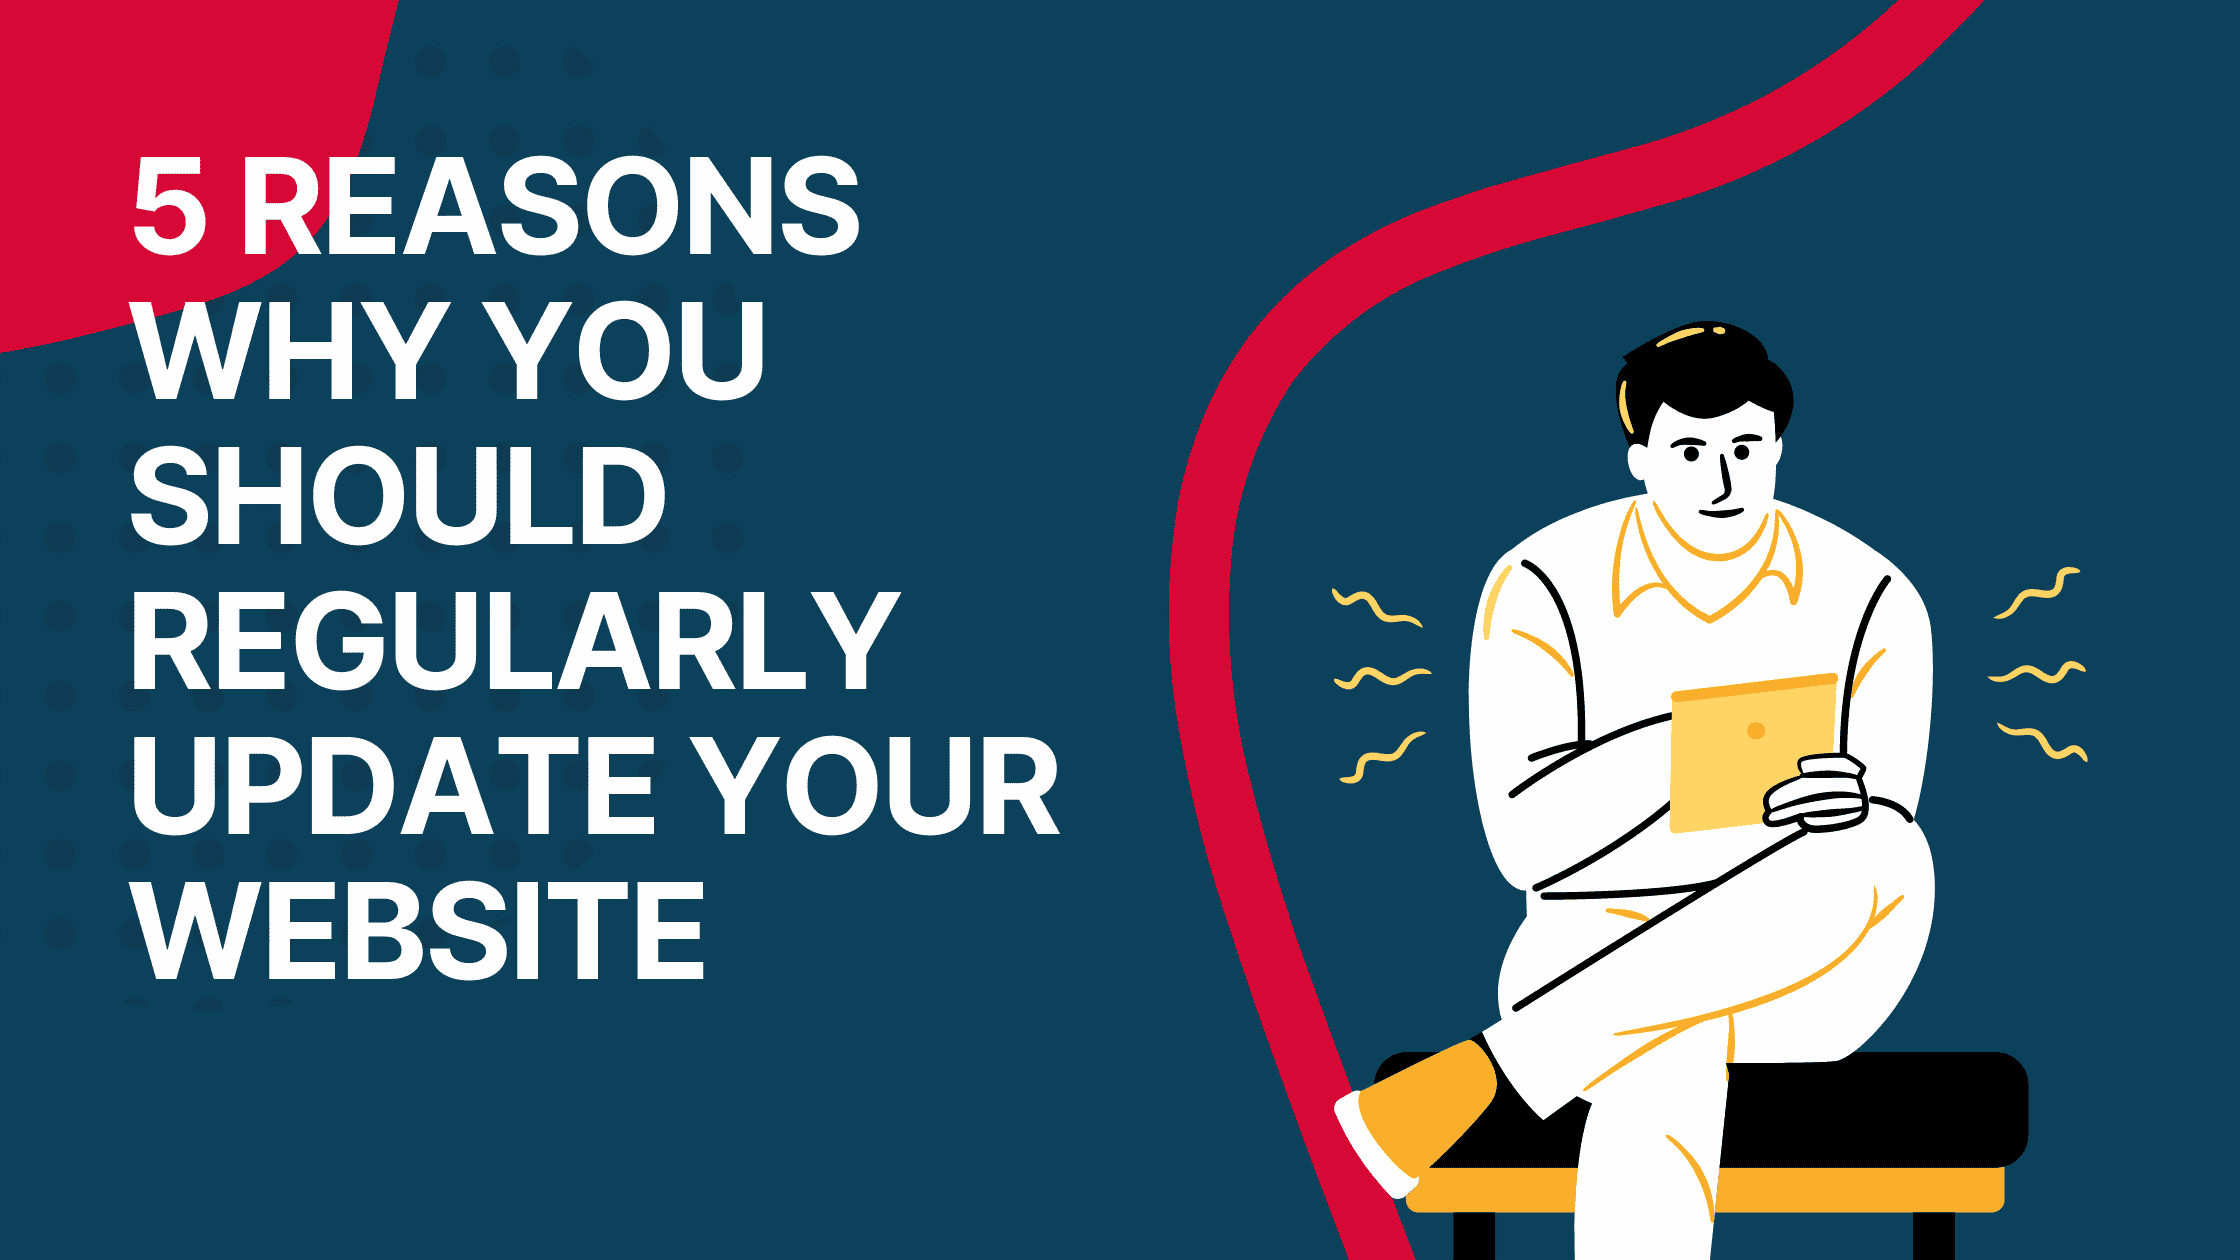 5 Reasons Why you Should Regularly Update your Website